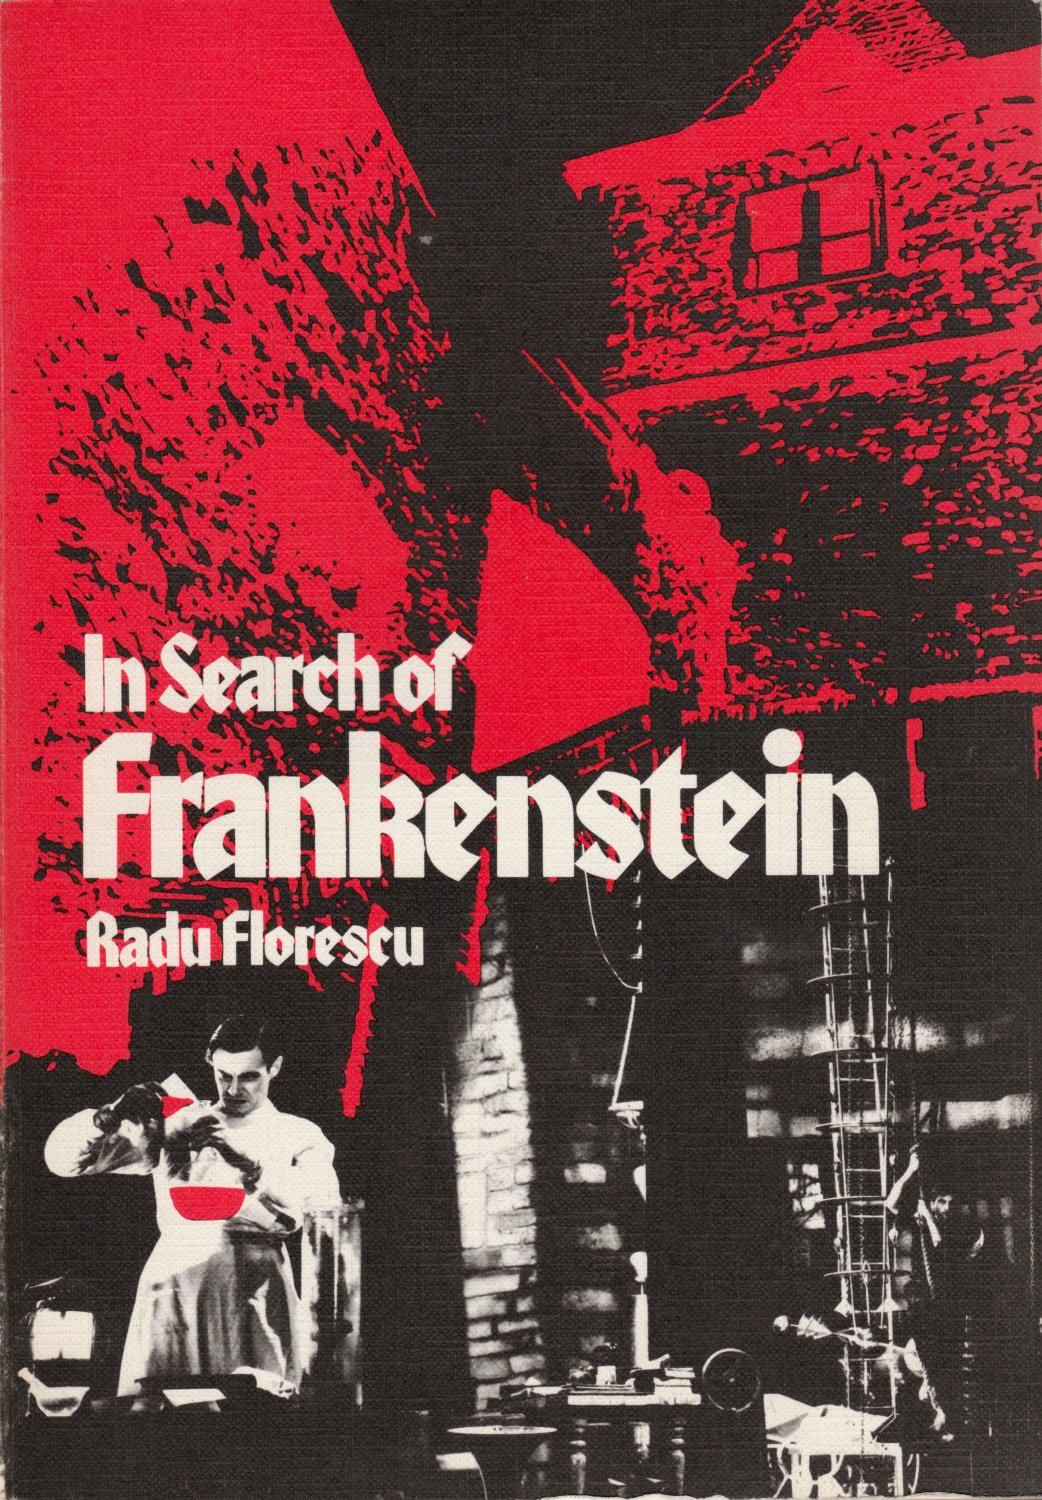 In Search of Frankenstein, by Radu Florescu (New English Library, 1975). From a charity